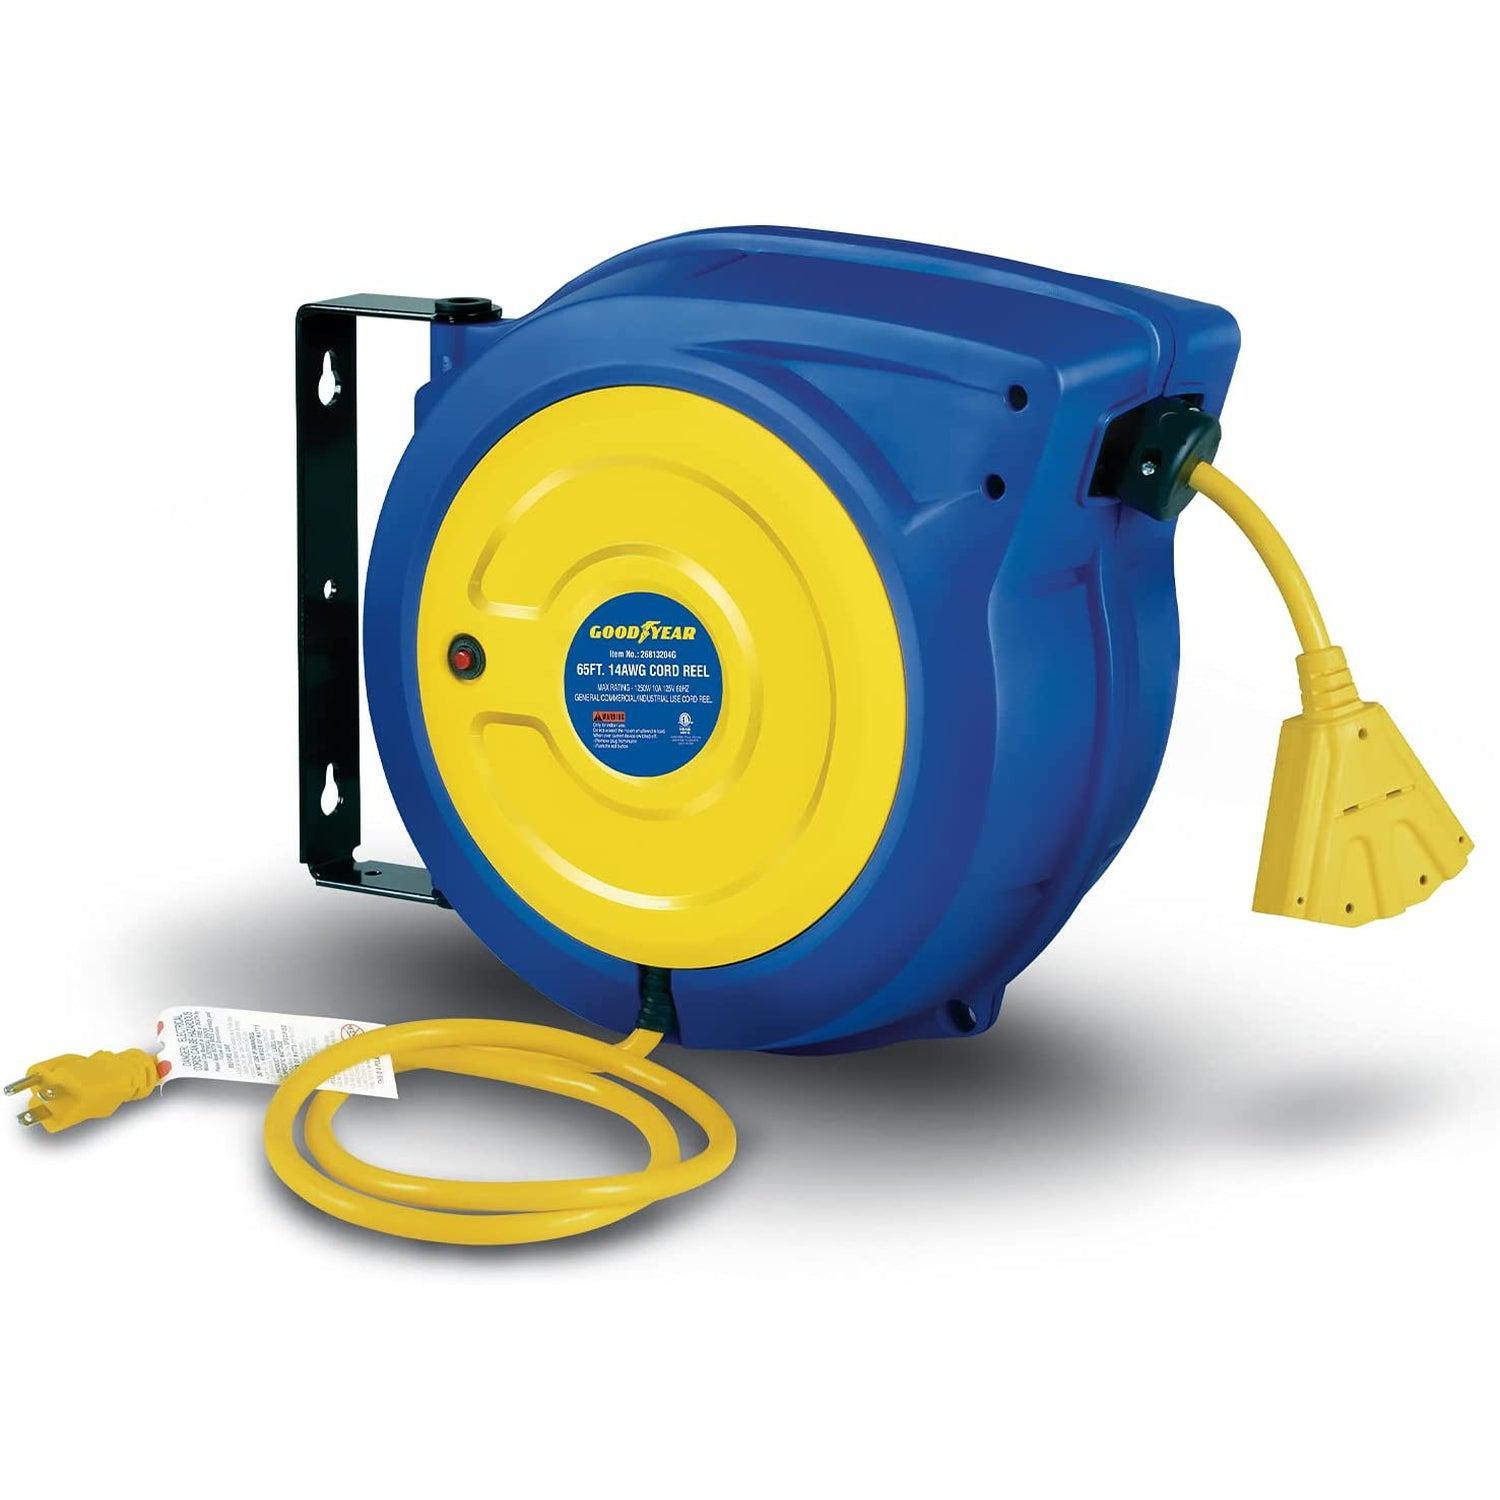 Goodyear Mountable Retractable Extension Cord Reel - 14AWG x 65' Ft, 3 Grounded Outlets, Max 10A - DIY Tools by GreatCircleUS